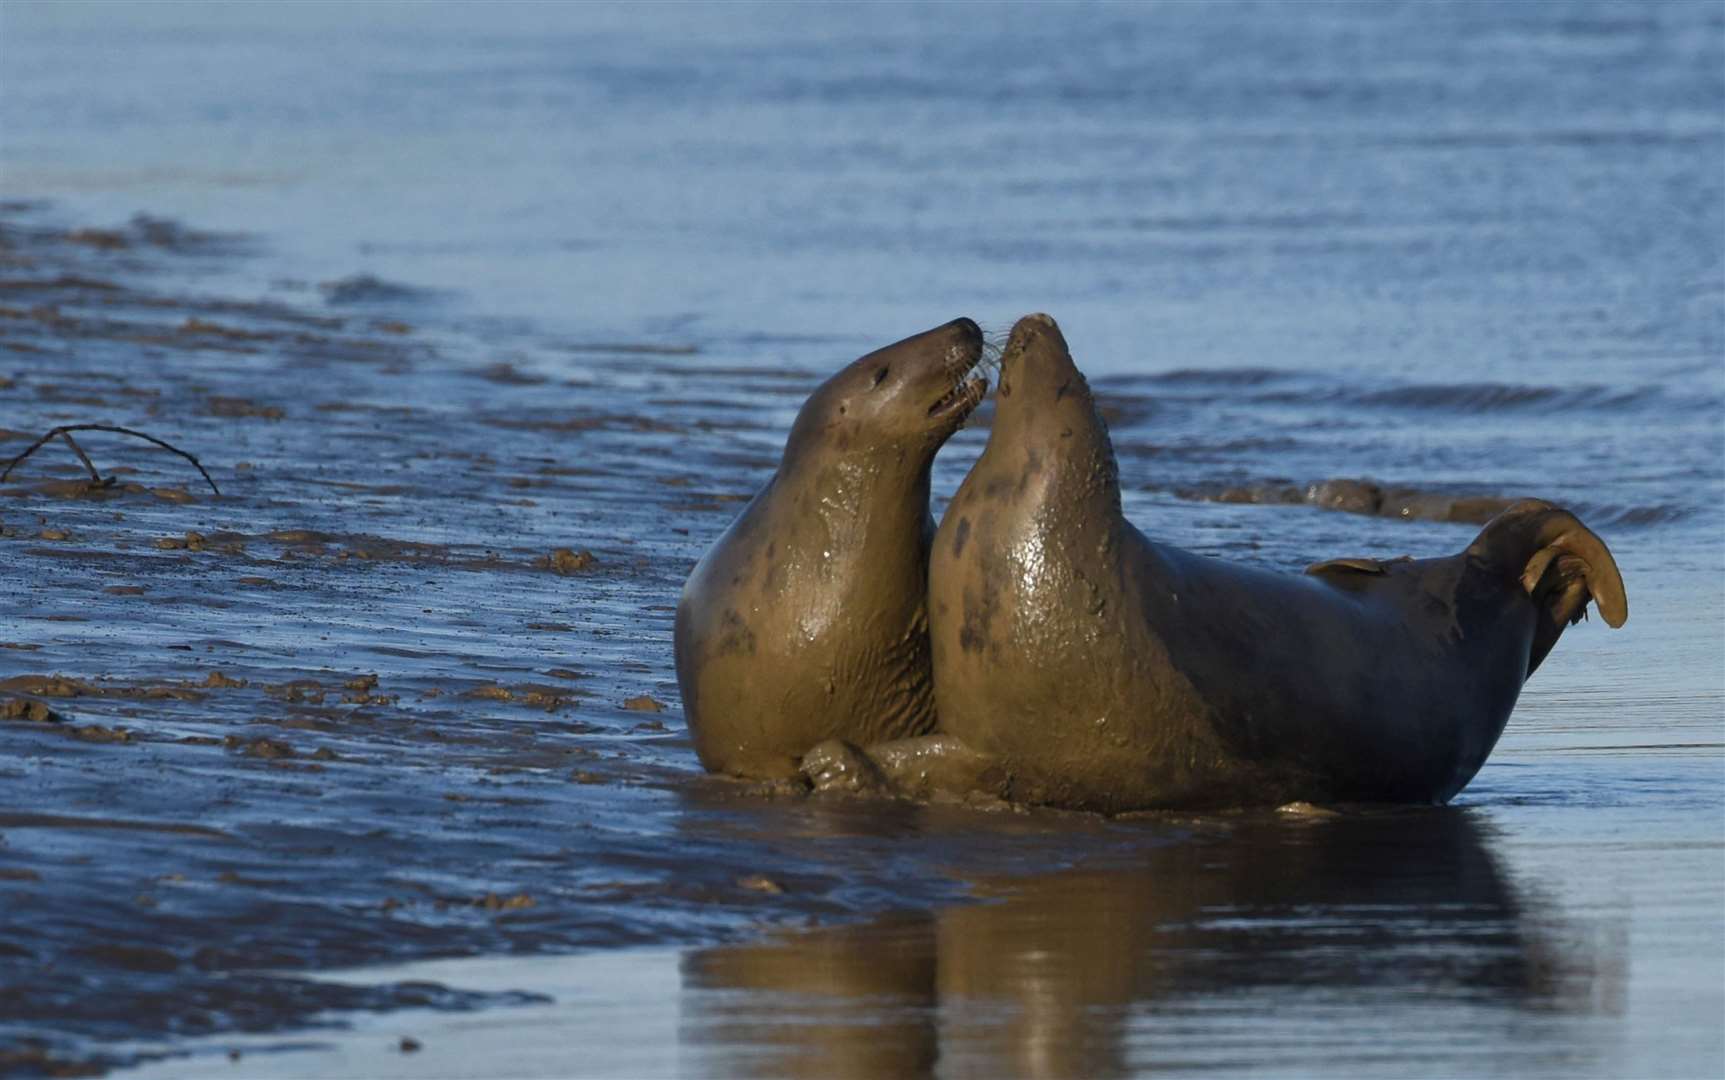 During pupping season females give birth and raise young at the shallow inlet. Picture: John Wilson